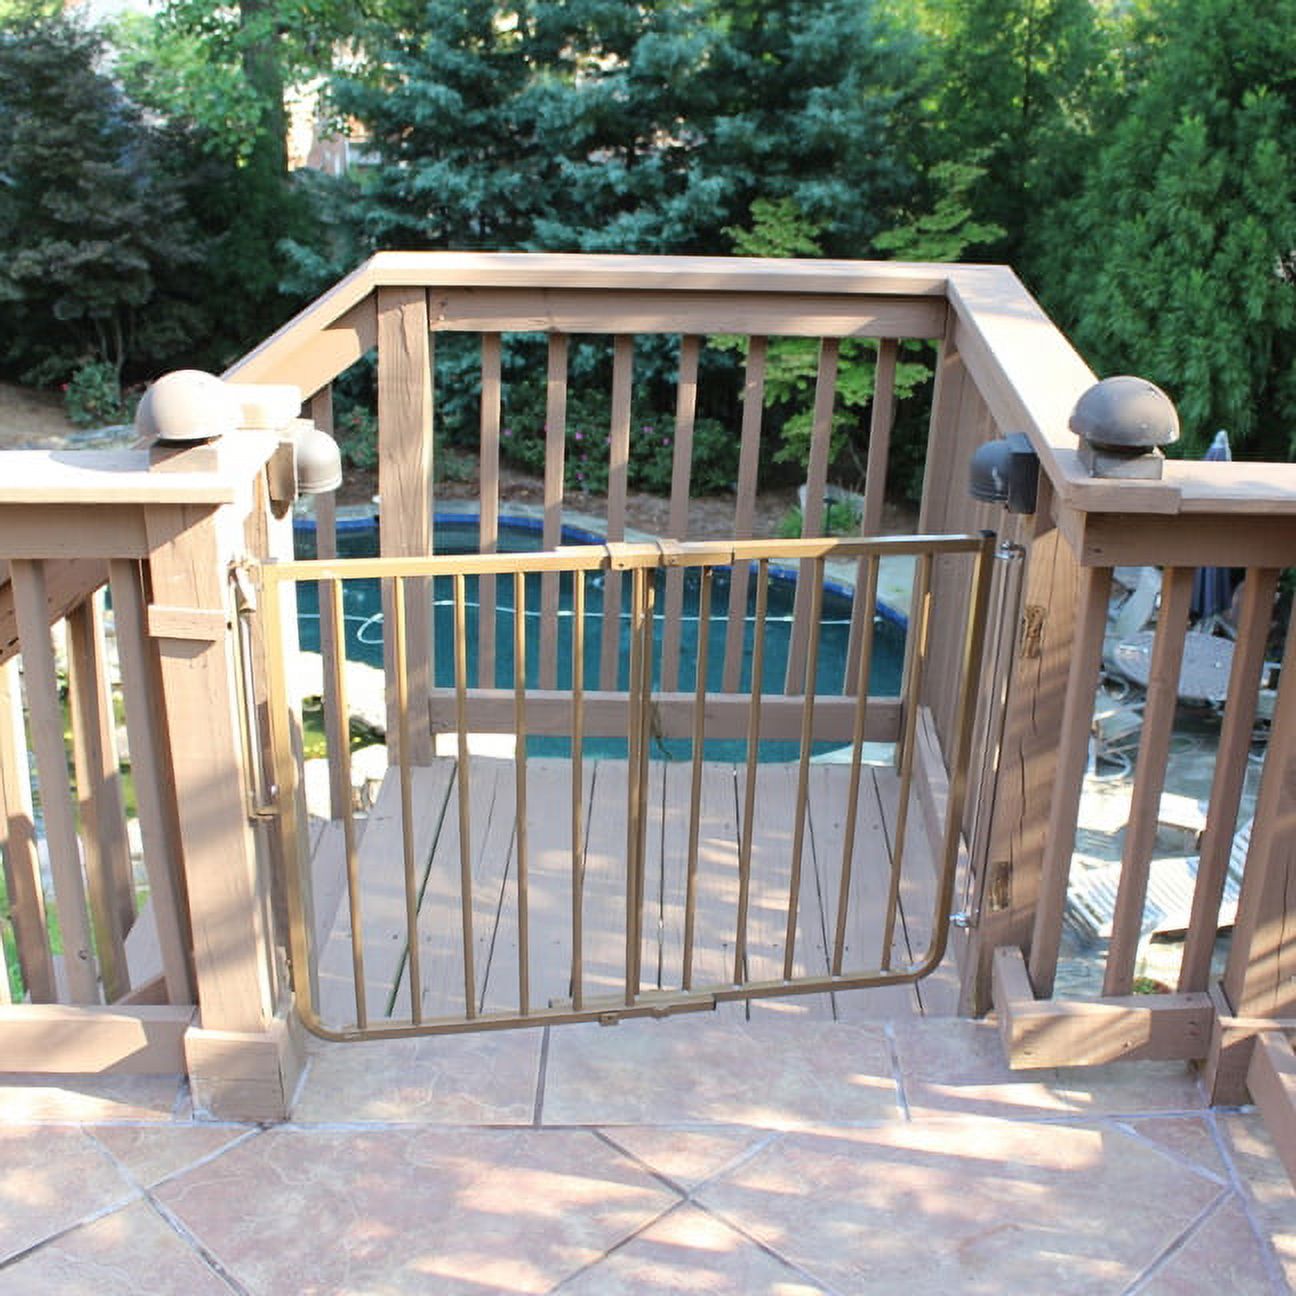 Cardinal Gates Stairway Special Outdoor Child Safety Gate - image 5 of 5